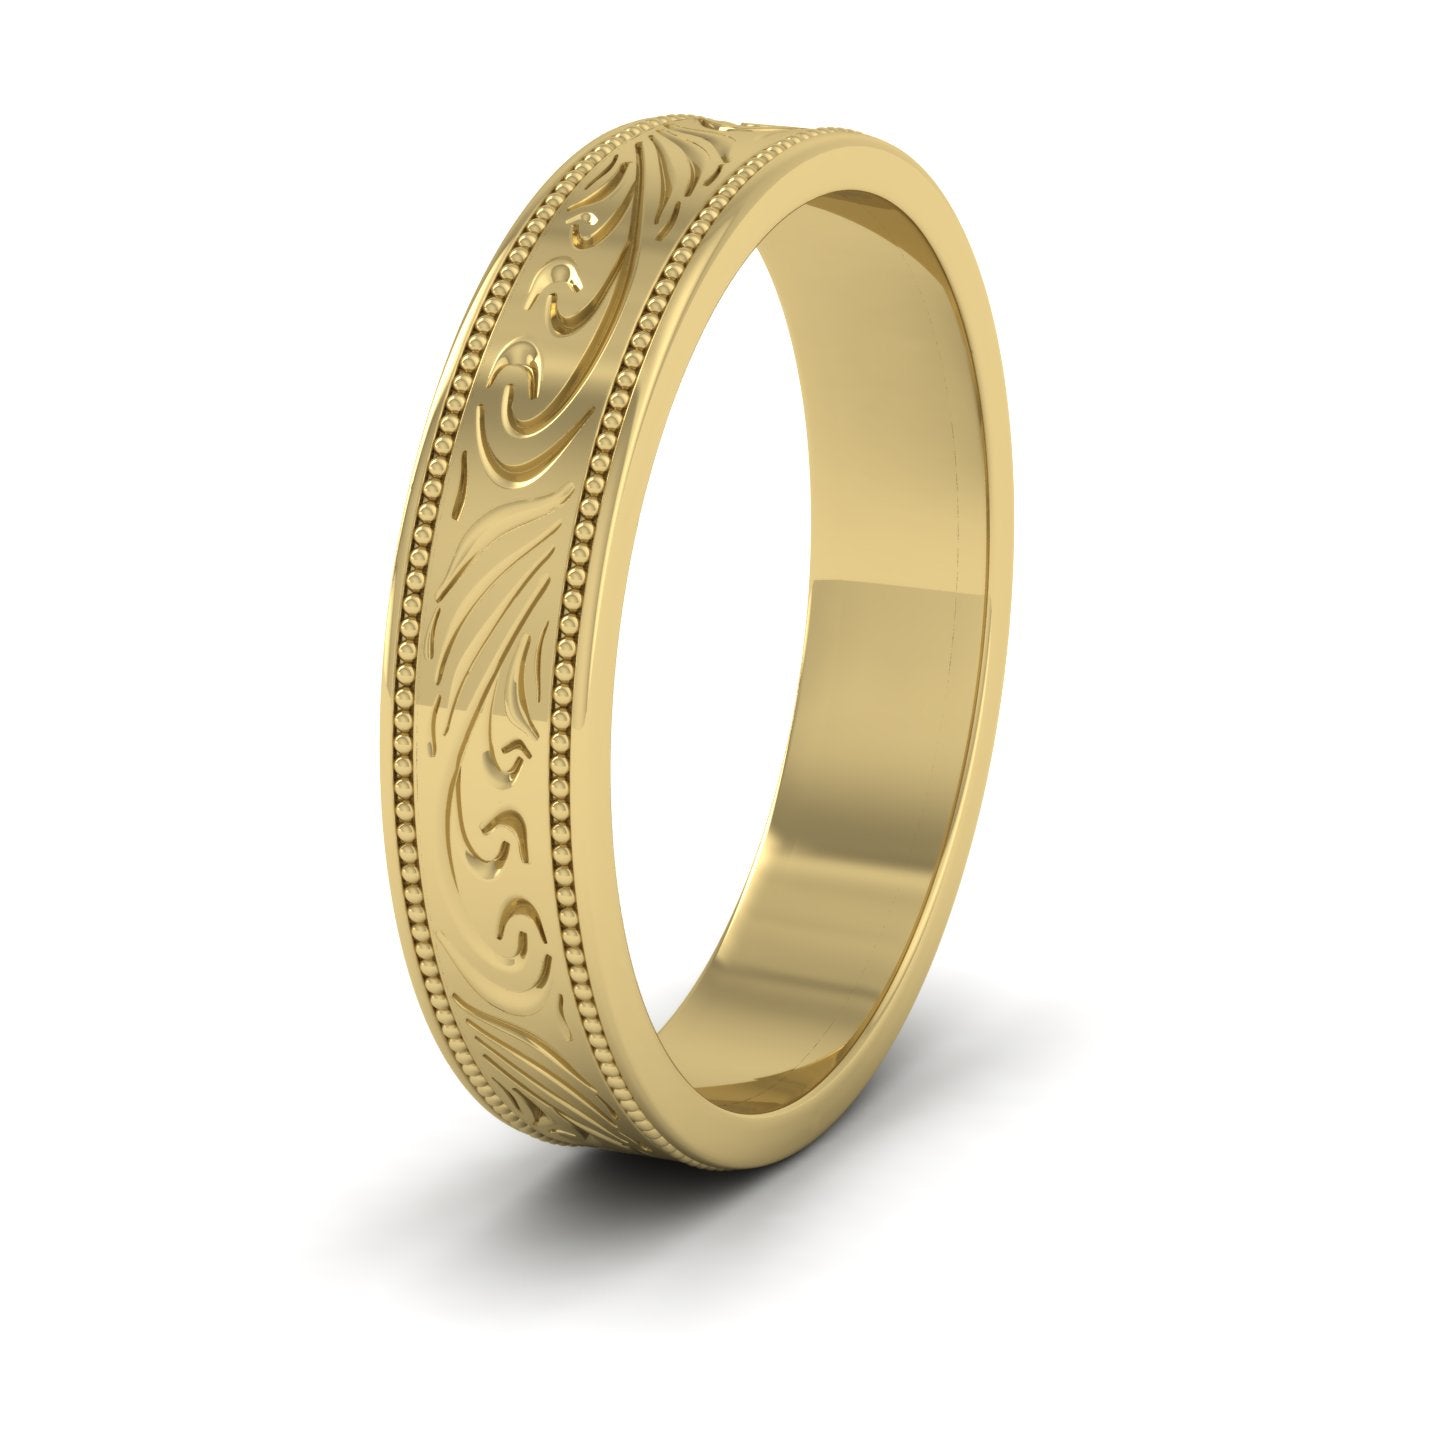 Engraved 22ct Yellow Gold 4mm Flat Wedding Ring With Millgrain Edge